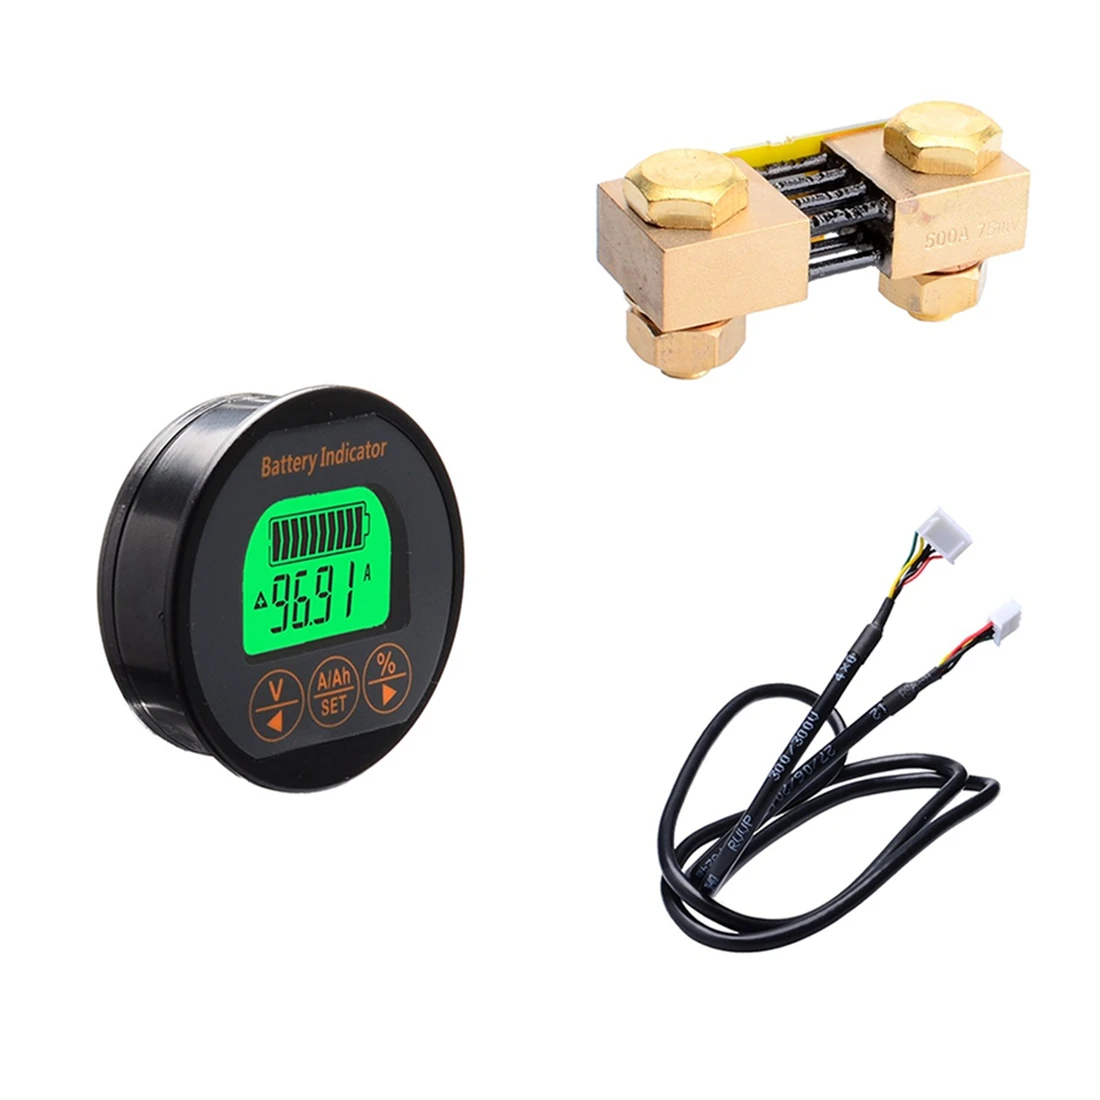 

DC 8-80V 100A TR16 Coulomb Counter Meter Battery Capacity Indicator Ammeter Voltmeter Battery Tester for Li-Ion Lipo